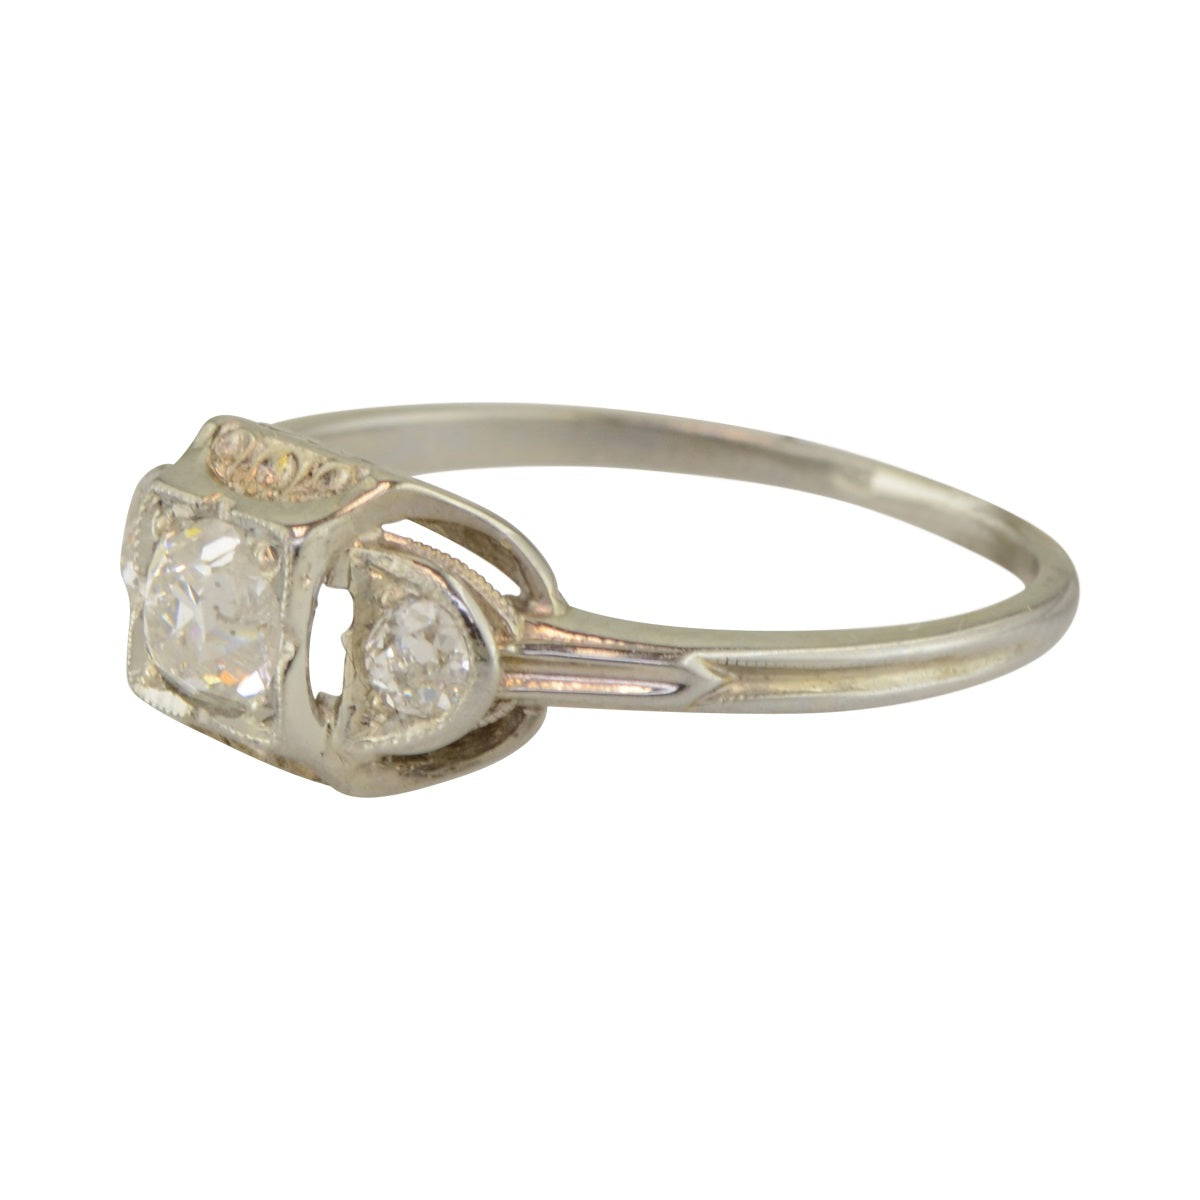 Origional Art Deco Engagement Ring in White Gold with Diamonds